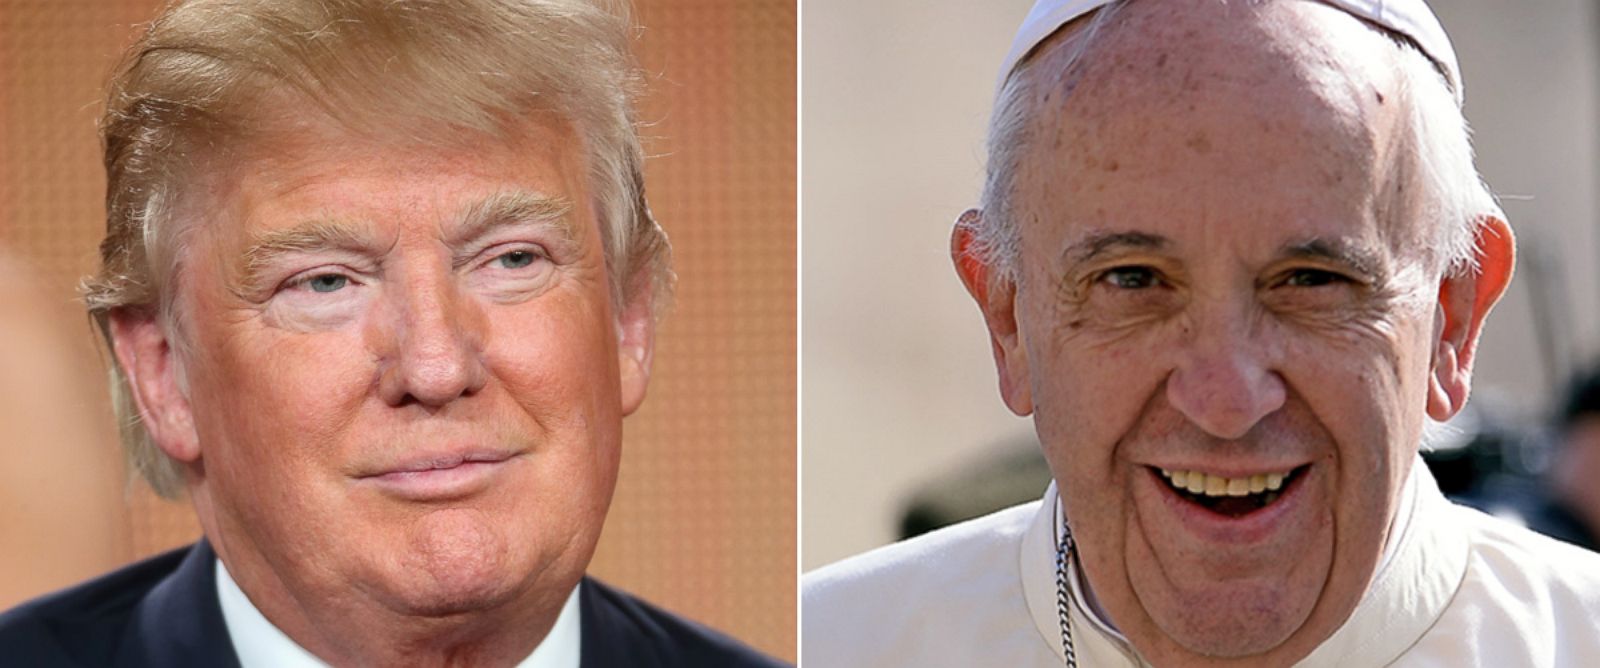 Pope’s Urges Trump To Be A Peacemaker